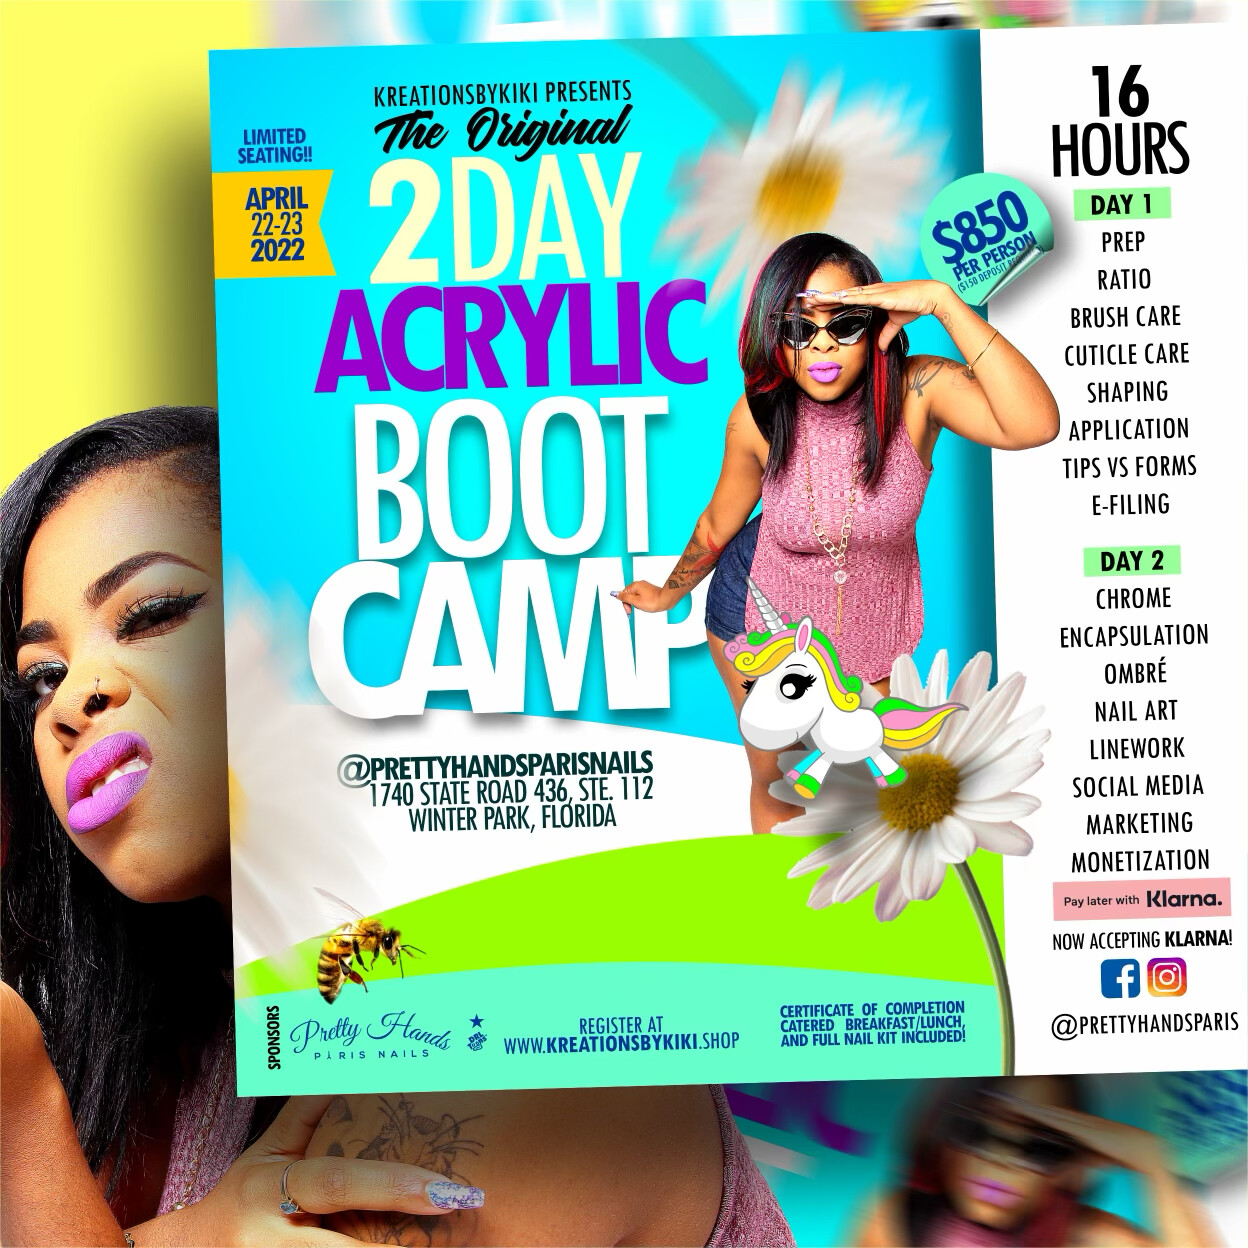 Orlando, FL APRIL 22nd-23rd Two Day Acrylic Bootcamp